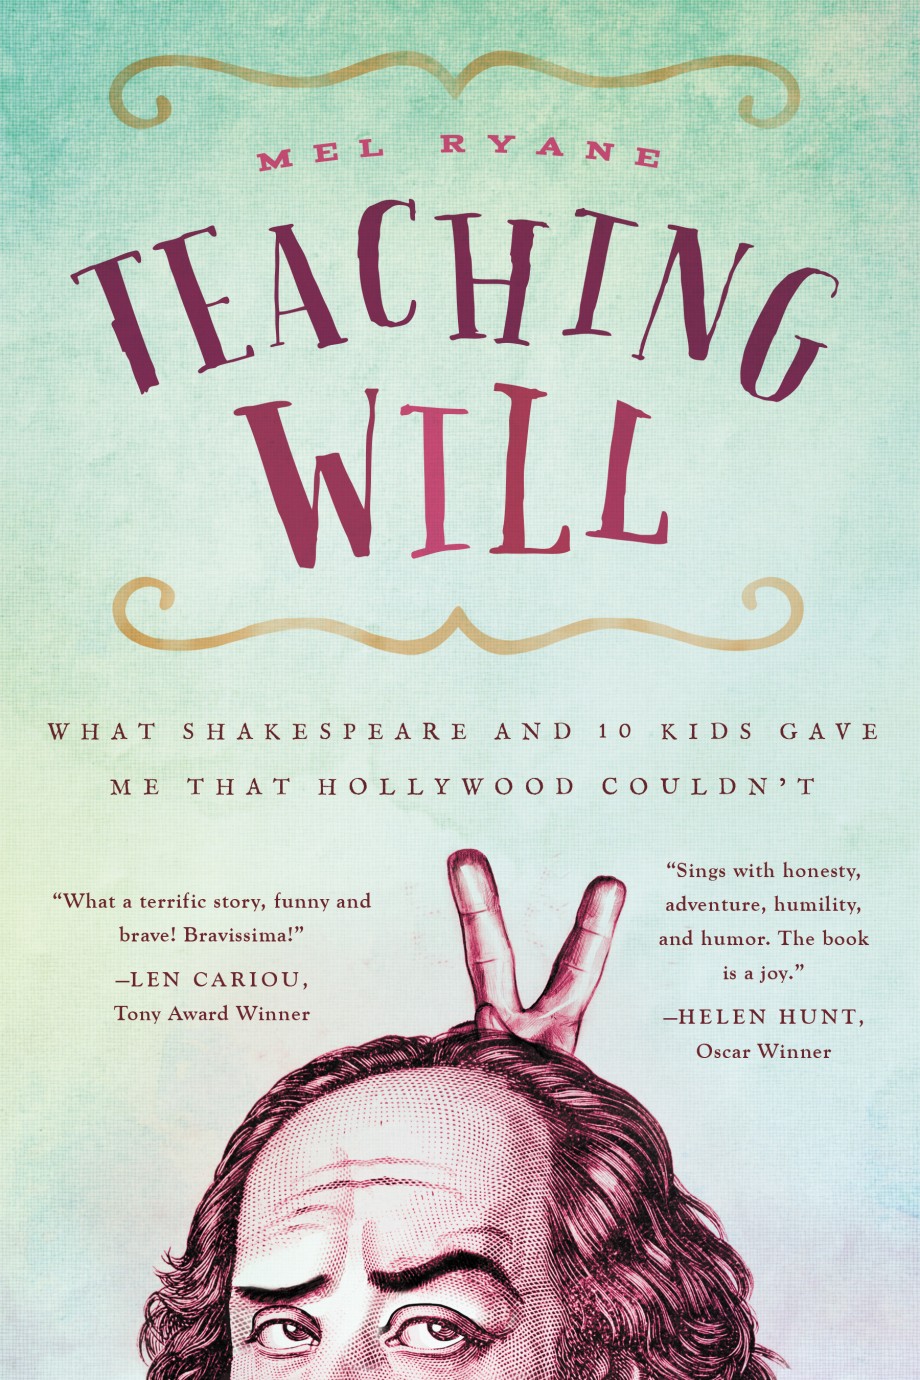 Teaching Will What Shakespeare and 10 Kids Gave Me that Hollywood Couldn't